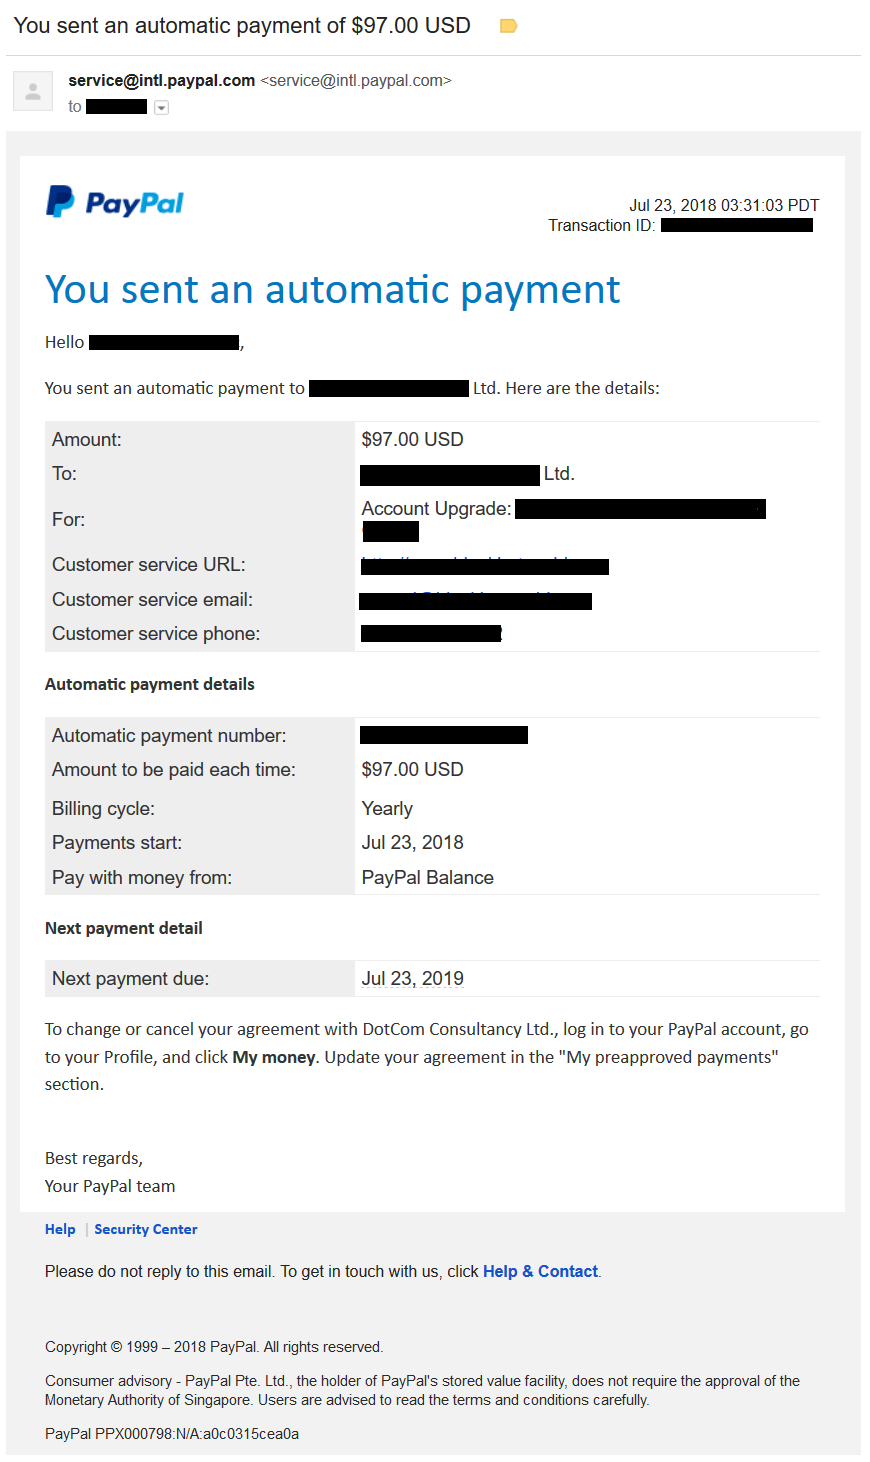 paypal-you-sent-an-automatic-payment-of